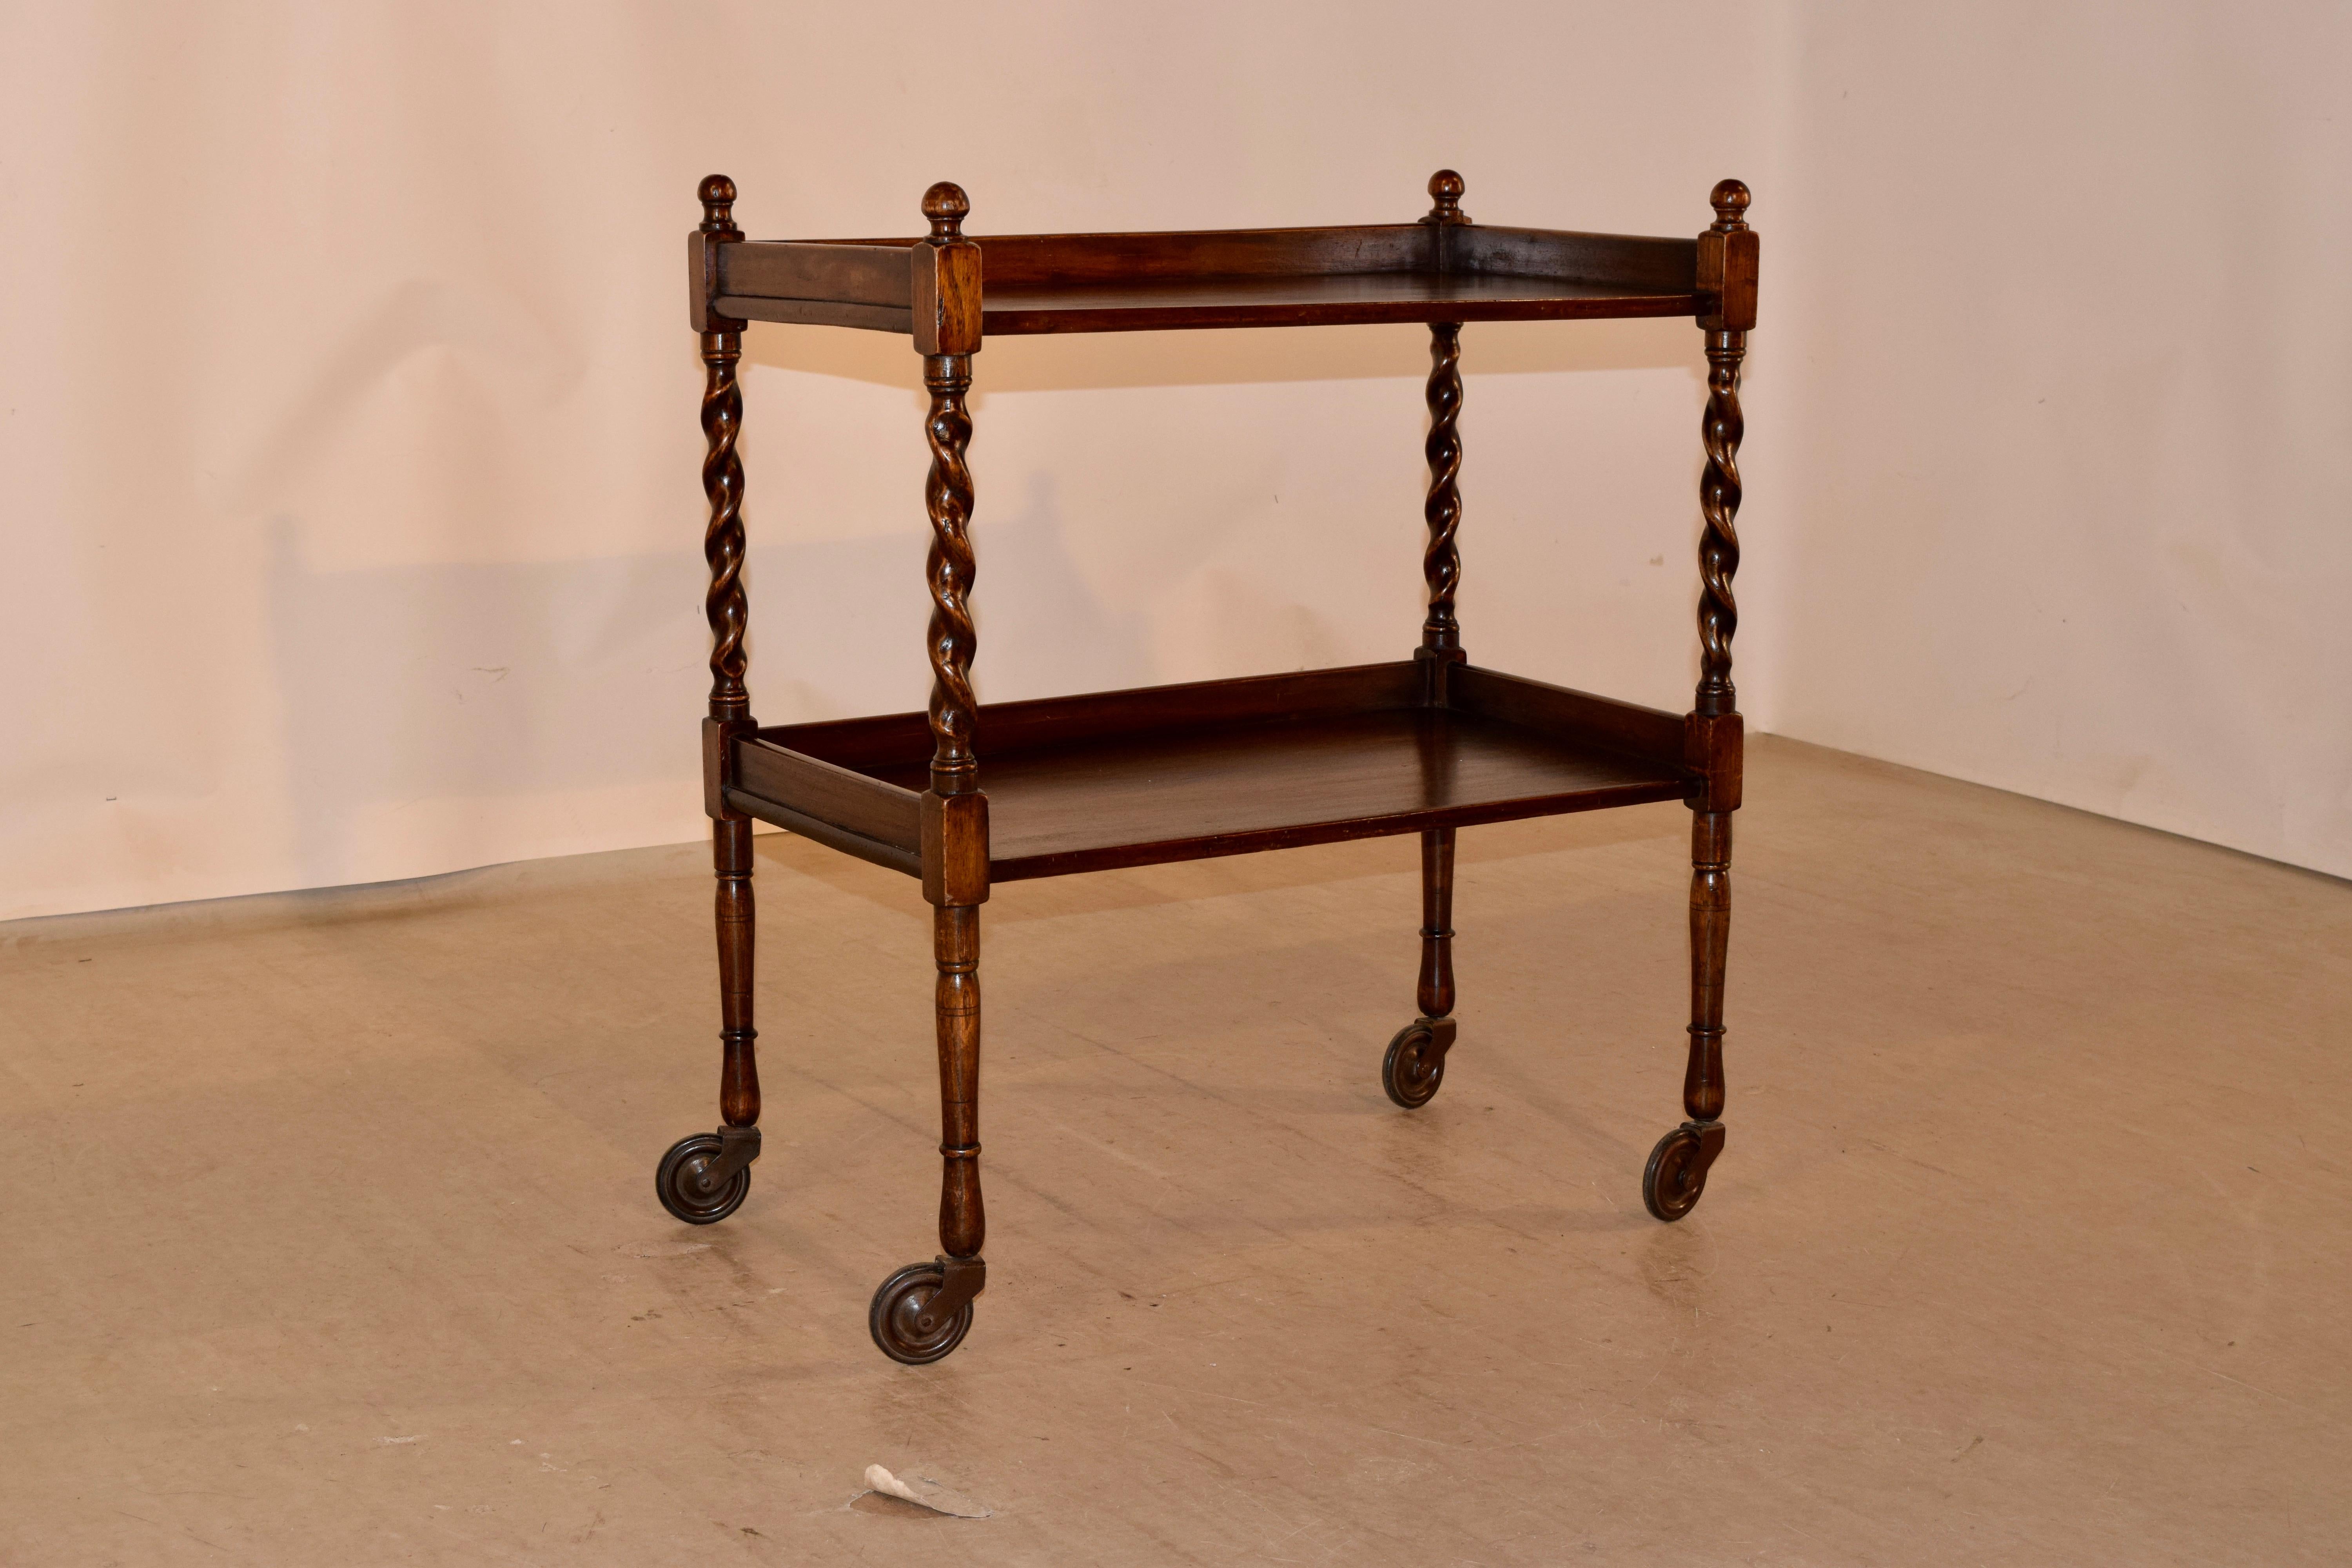 Edwardian drinks cart from England made from oak with two shelves which have galleries on three sides, separated by hand-turned barley twist shelf supports following down to hand-turned legs joined by simple stretchers, terminating in casters.